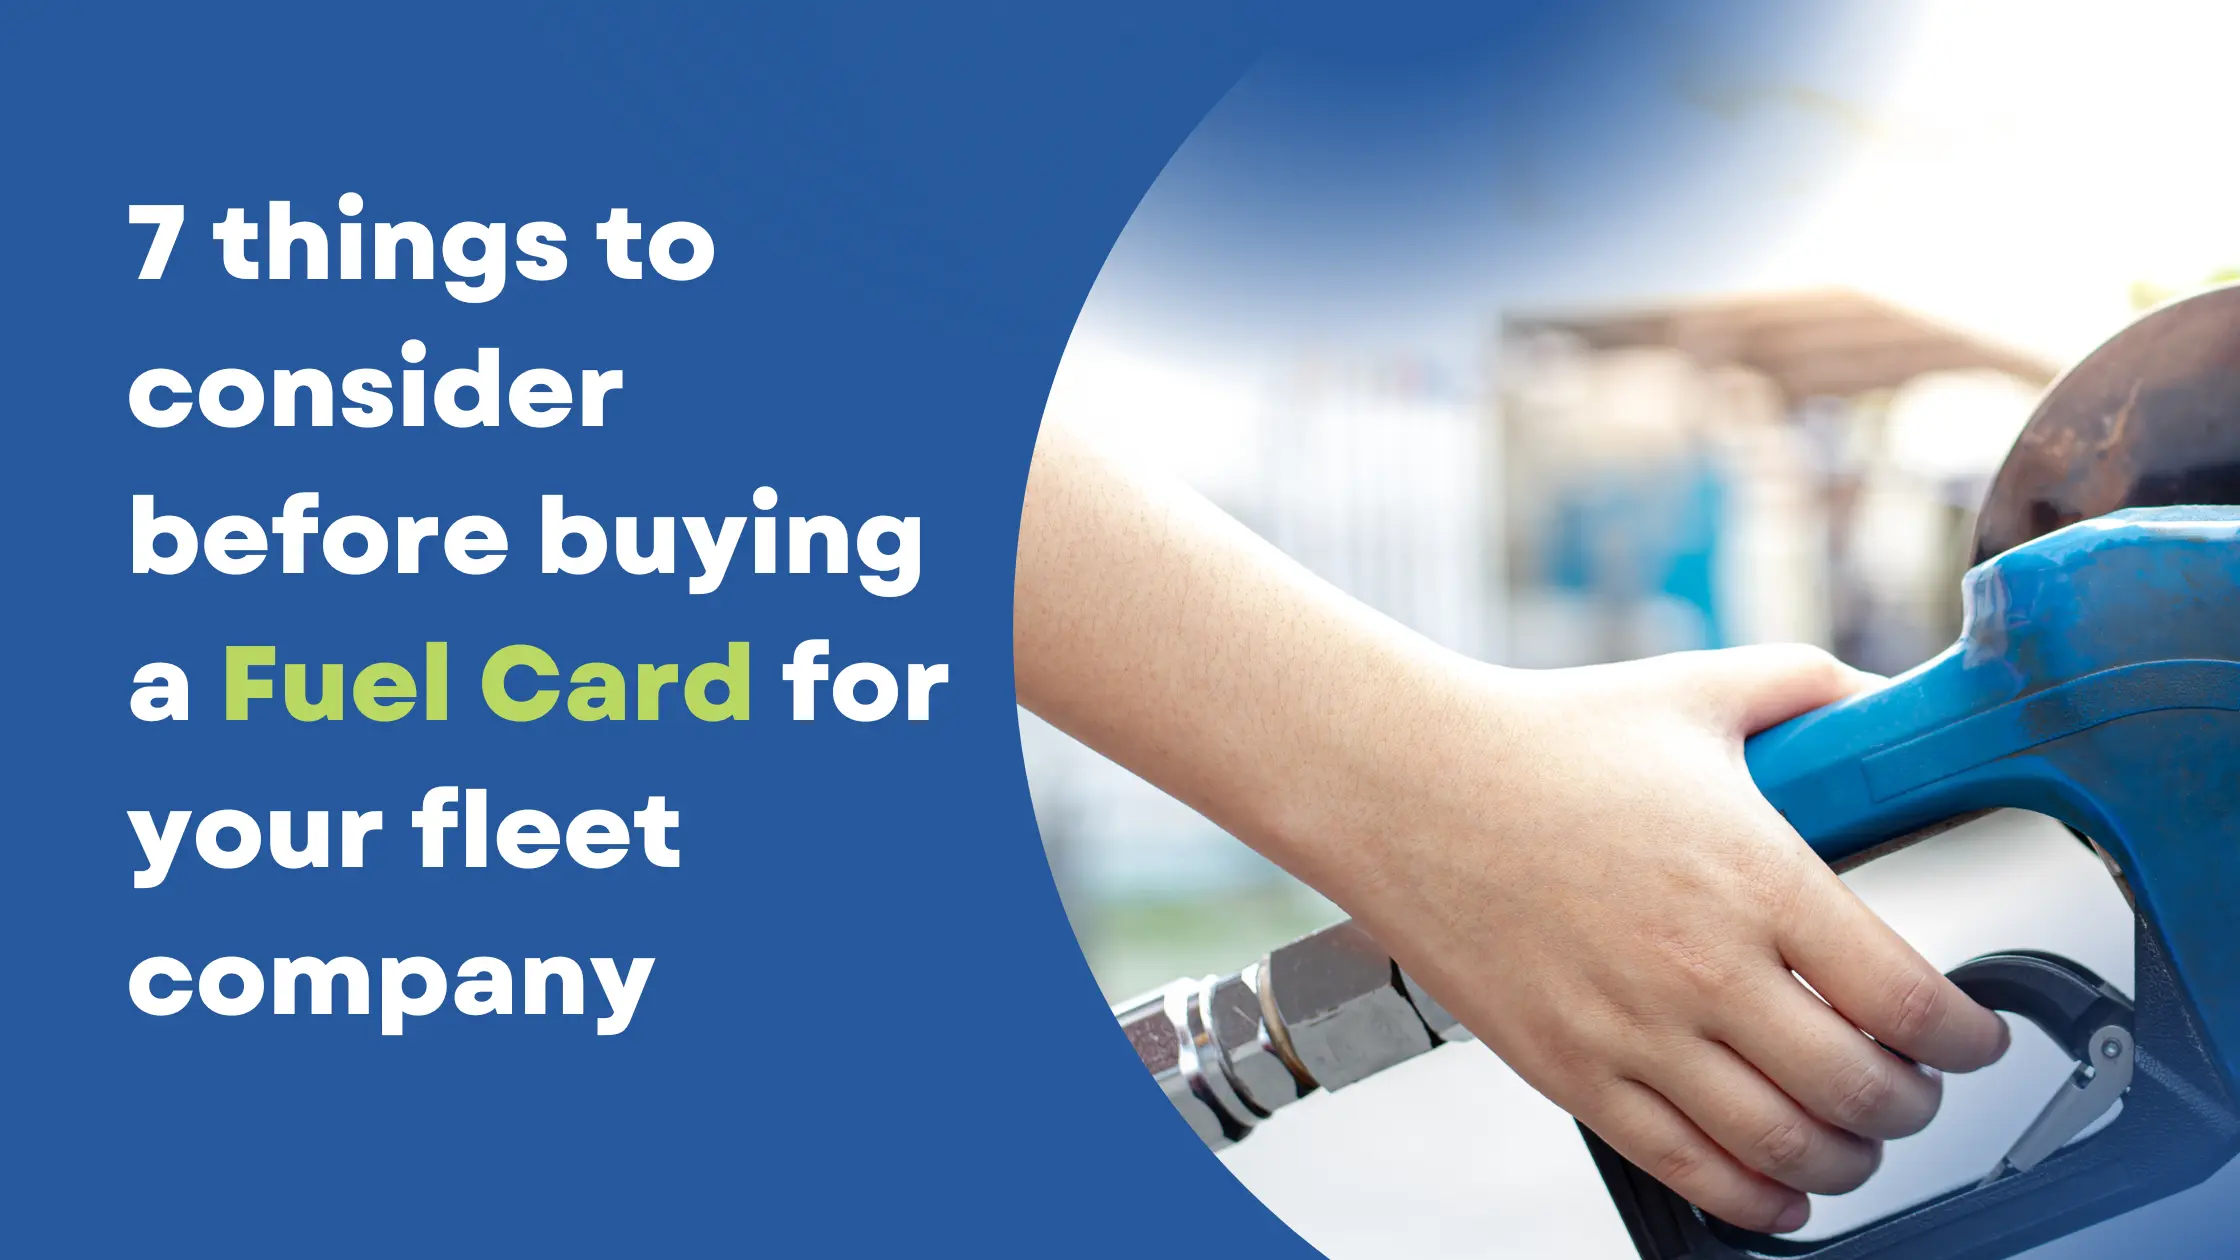 Consider these 7 points before buying a Fuel Card